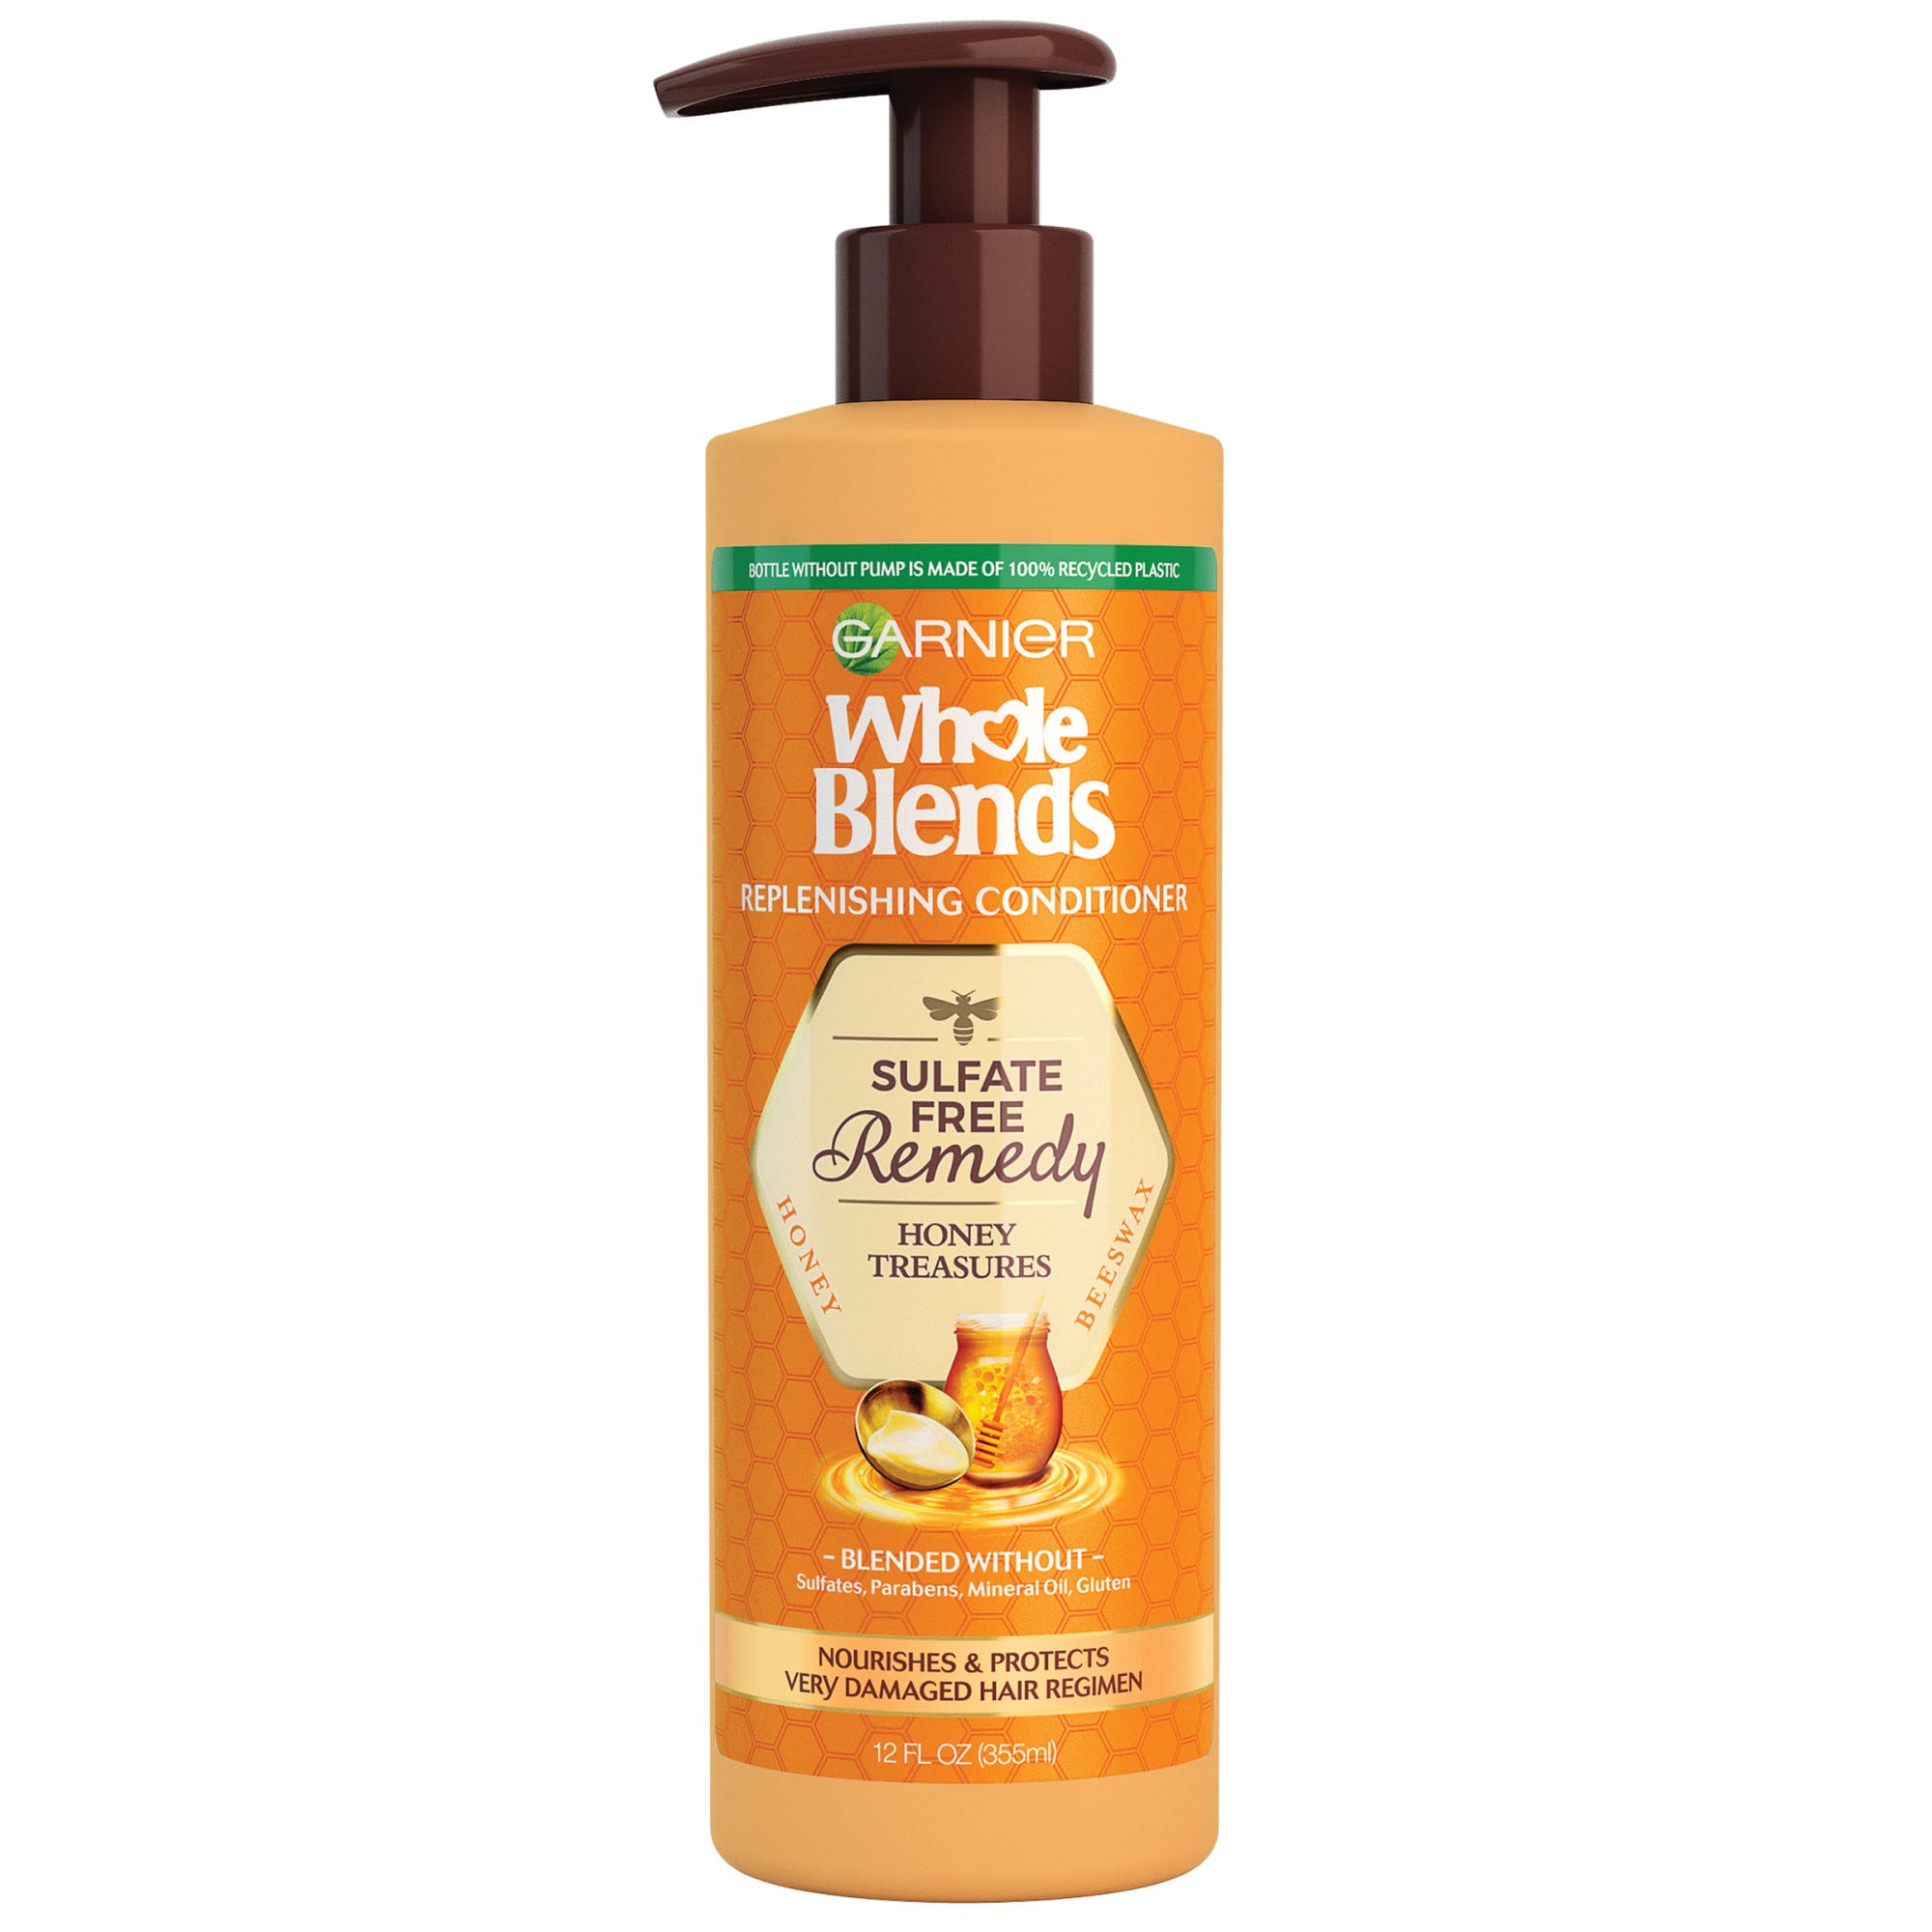 Garnier Whole Blends Sulfate Free Remedy Honey Treasures Conditioner for Dry Hair - 12 fl oz